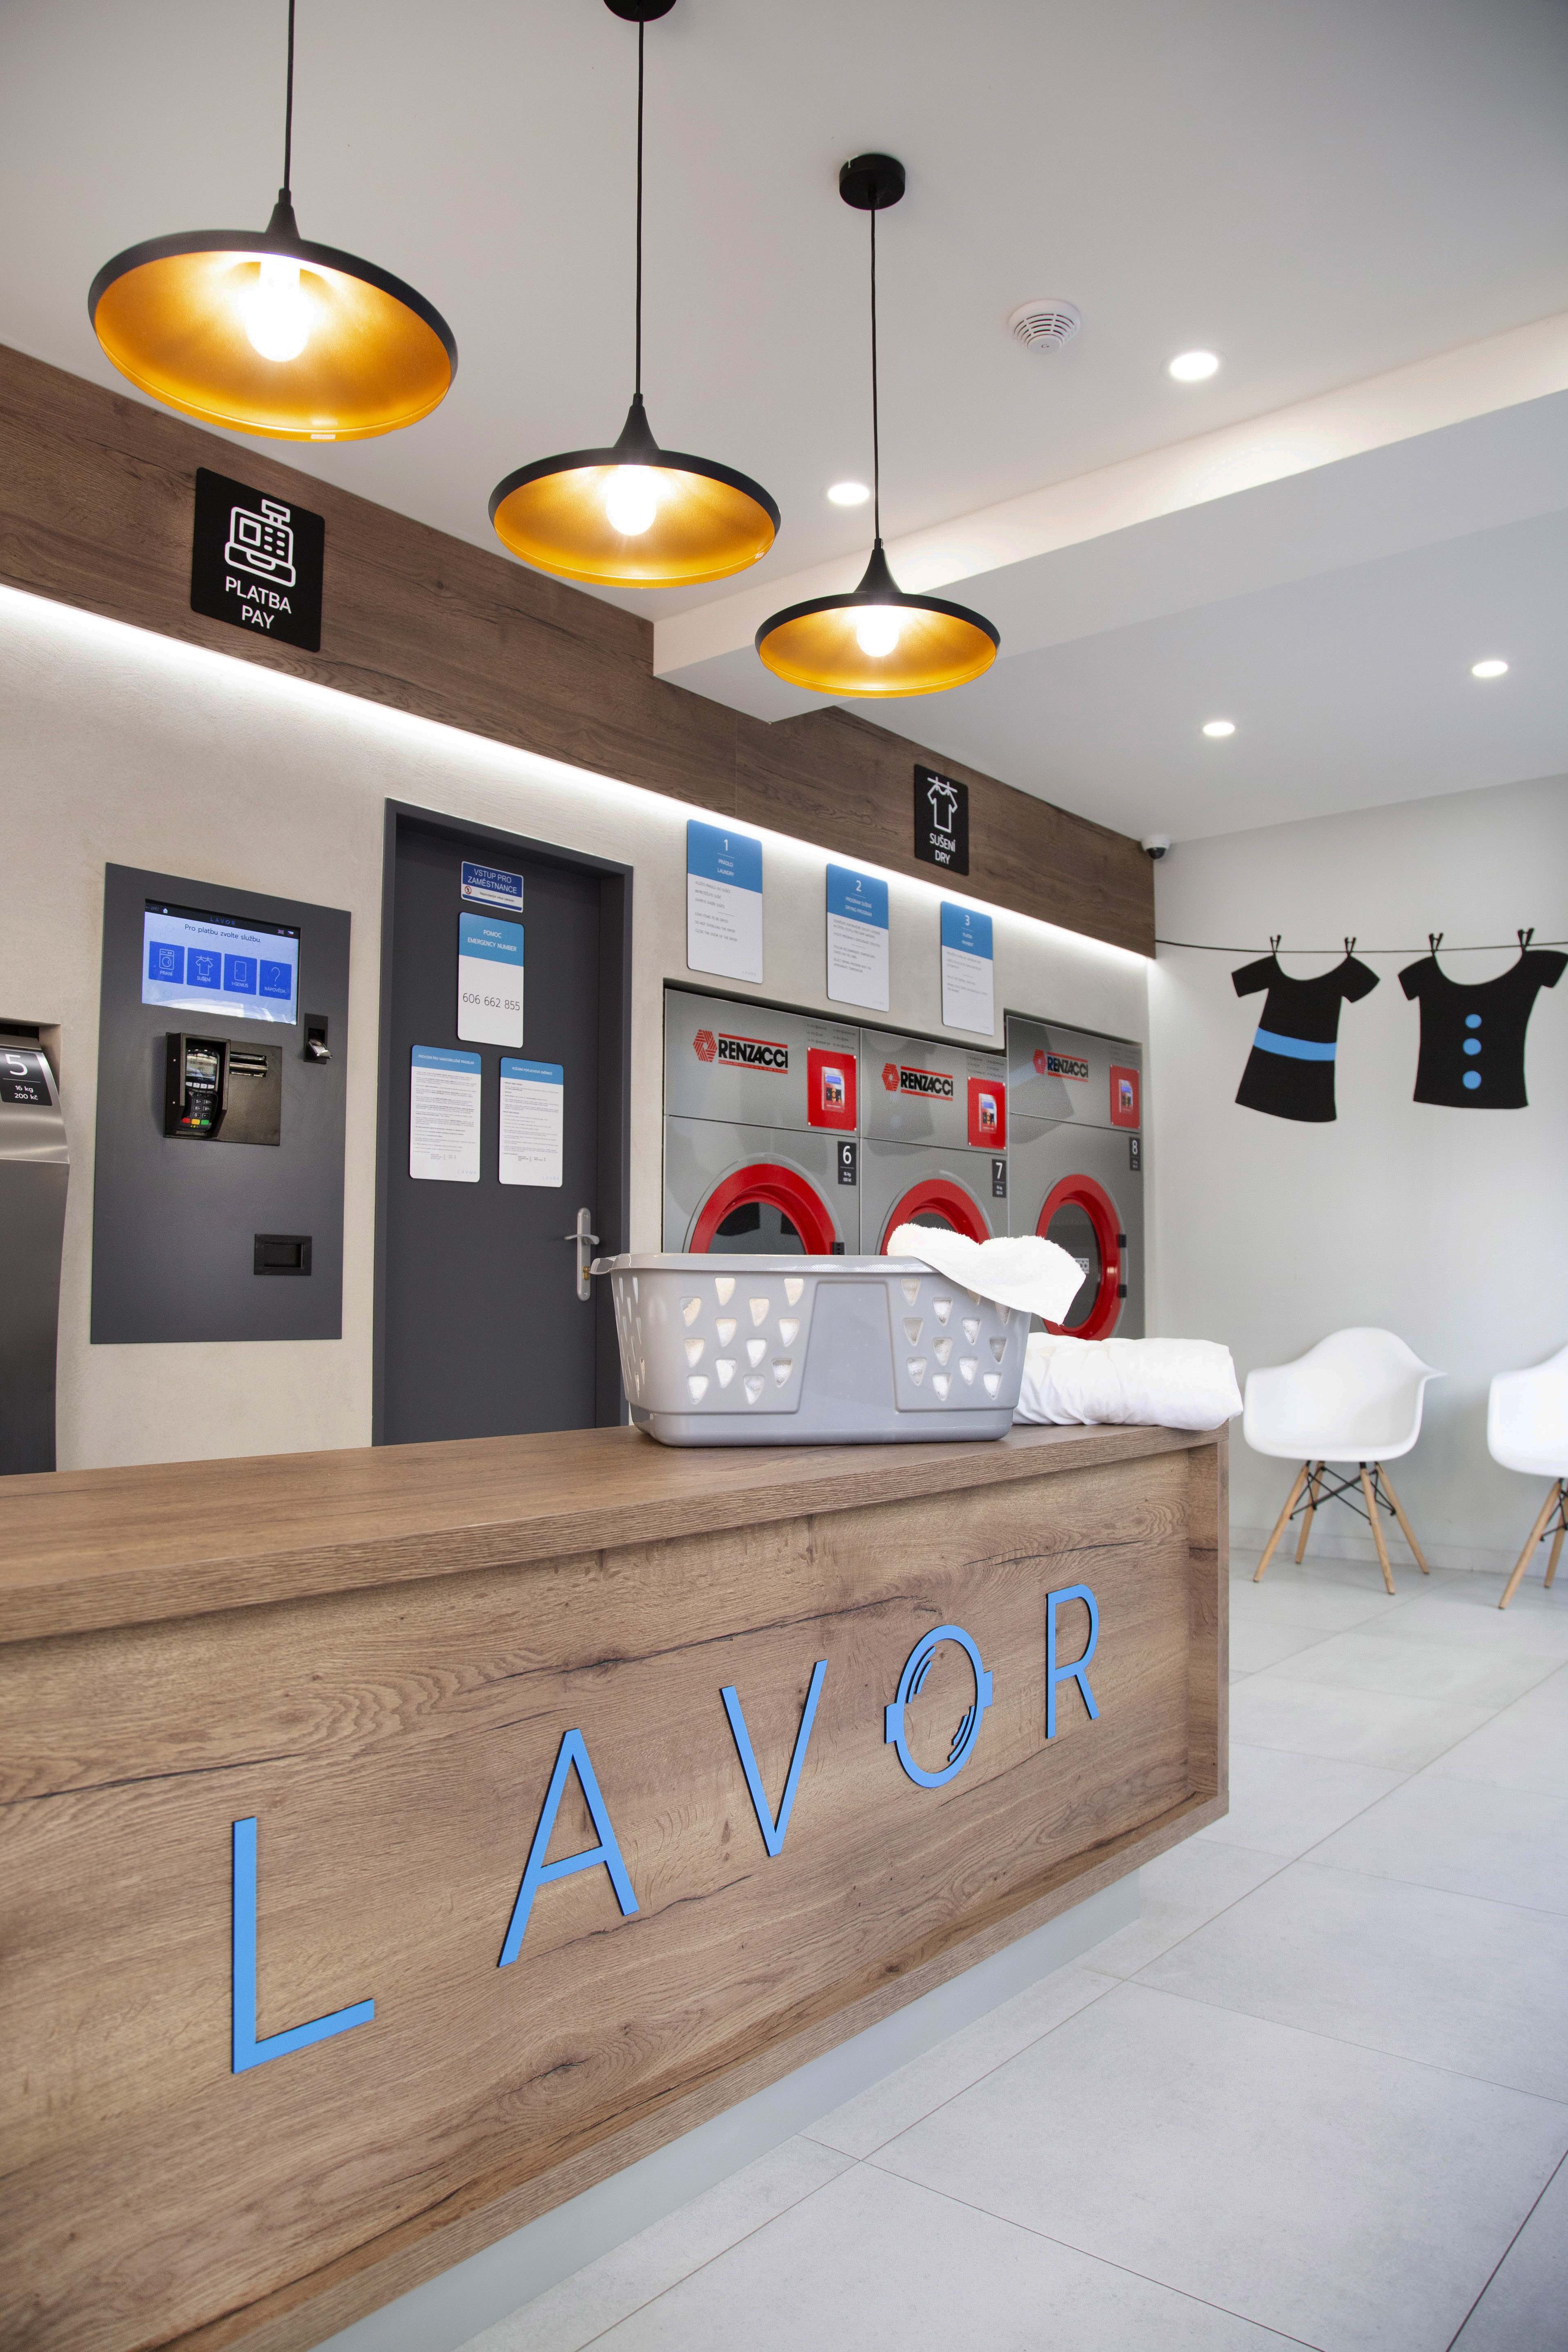 LAVOR branches are open on bank holidays